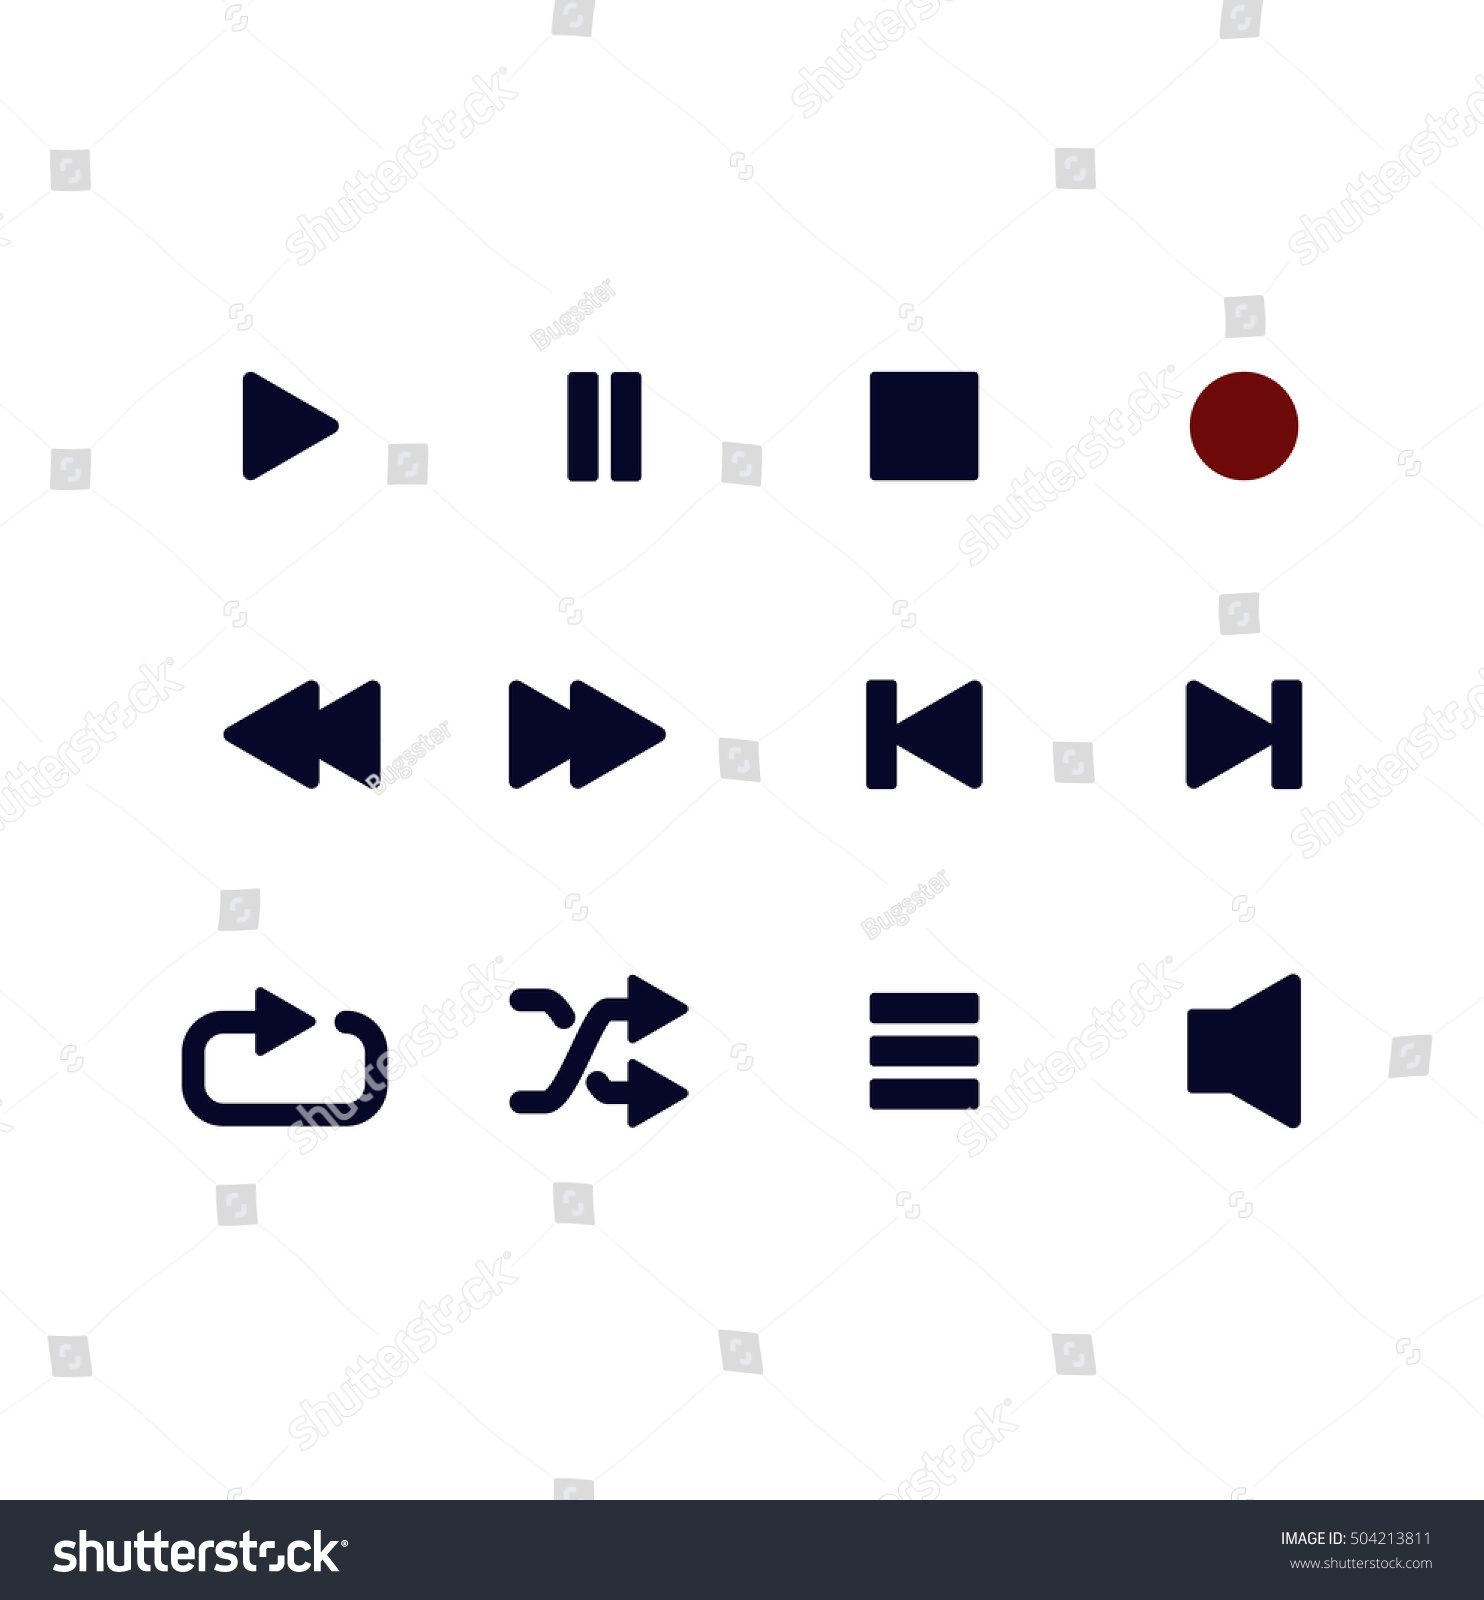 Video Playback Icon Royalty Free Cliparts, Vectors, And Stock 